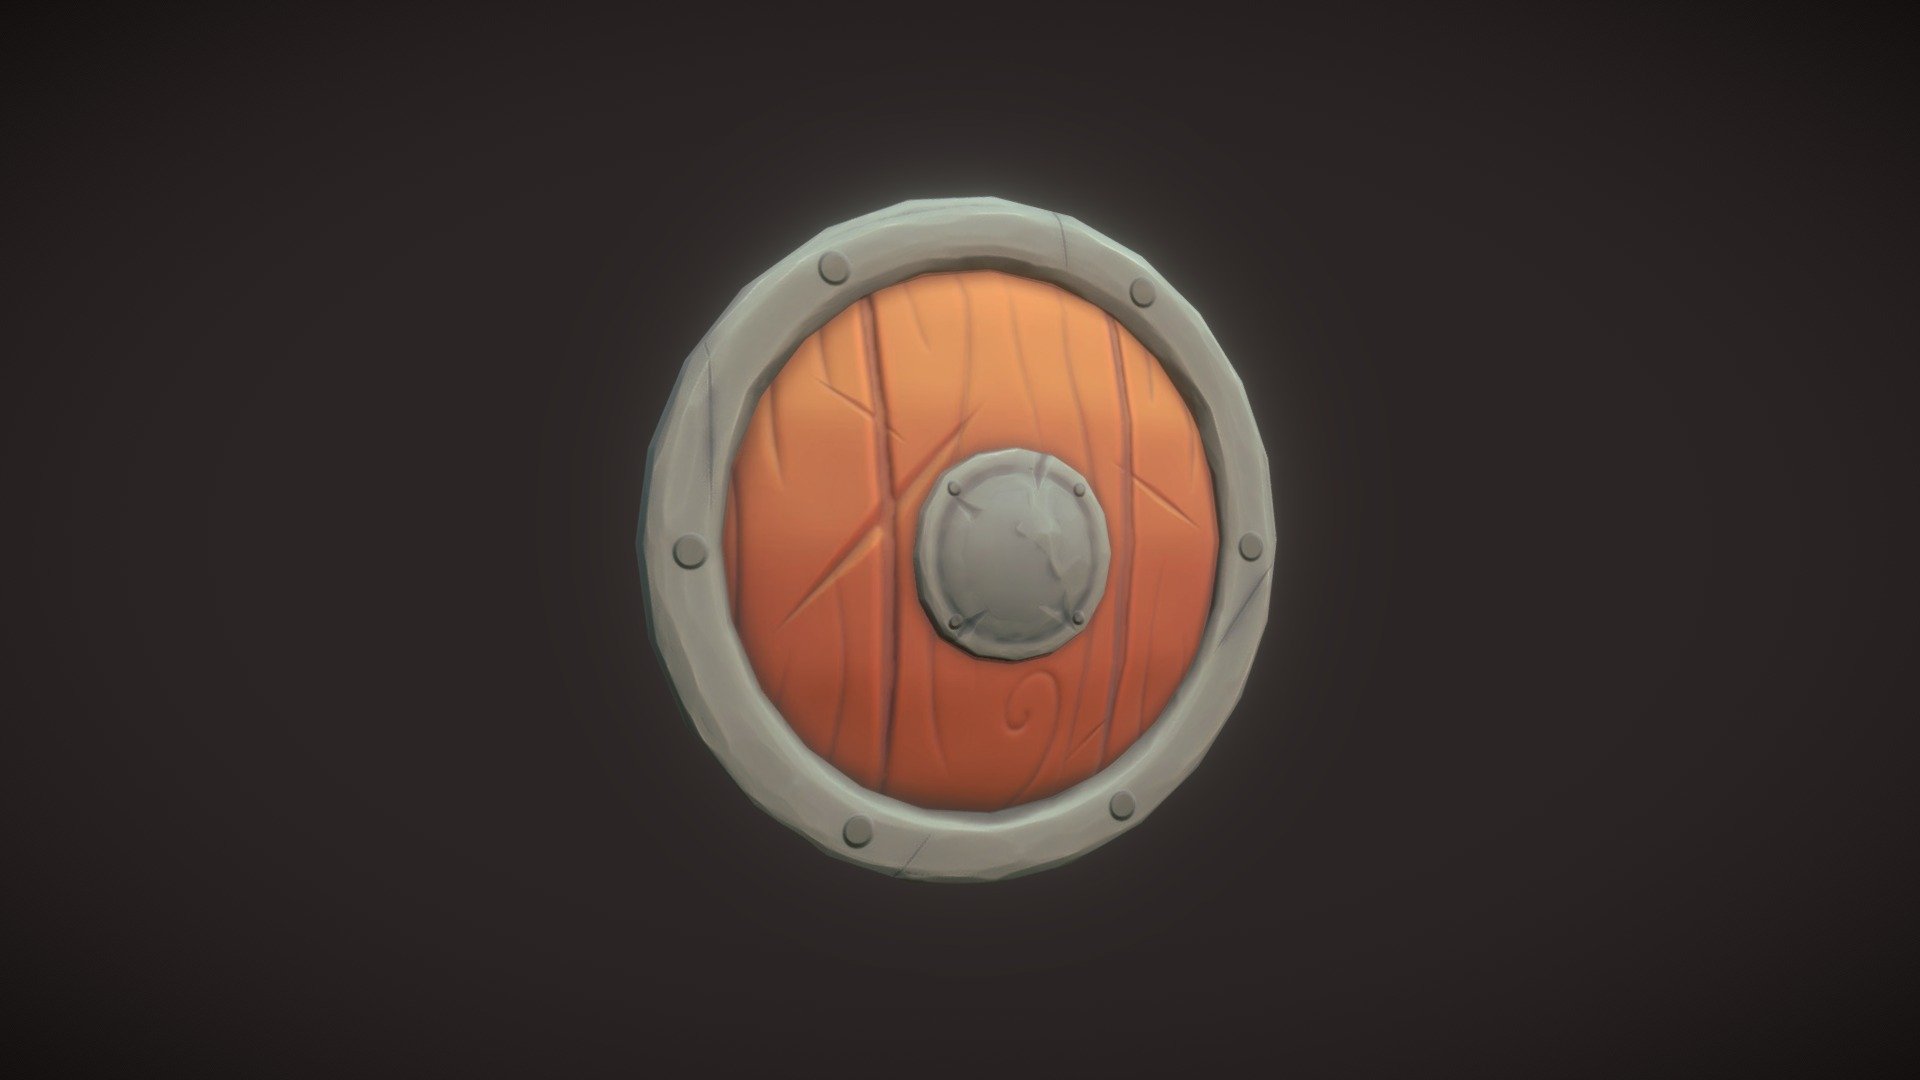 Stylized wooden shield, modeled in Maya and Zbrush and textured in Substance Painter. This model is game ready and compatible with Unreal Engine and Unity 3D.

File Formats:

OBJ
FBX

Texture resolutions:

512x512
1024x1024
2048x2048

Texture Formats:

Base Colour
Metallic
Roughness
Normal
Ambient Occlusion

https://martynagrek.artstation.com/ - Wooden Shield - Buy Royalty Free 3D model by MartynaGrek 3d model